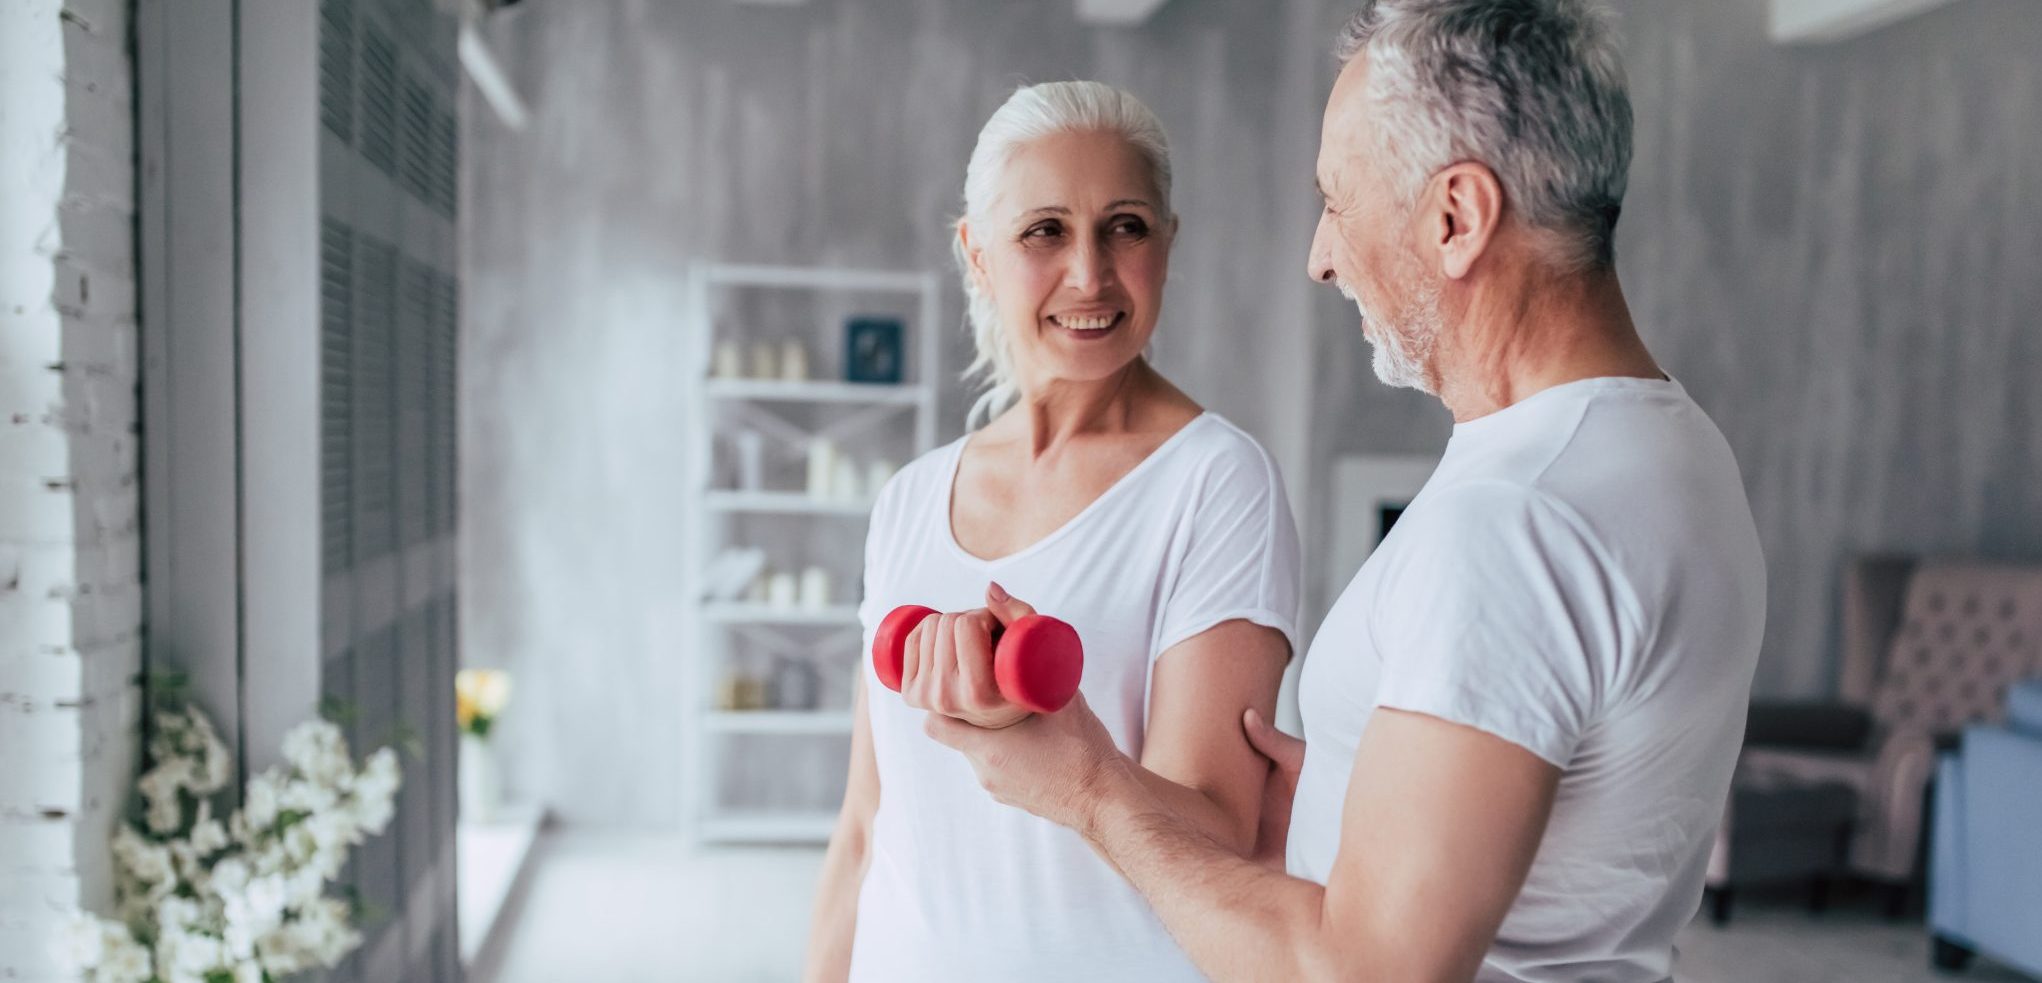 What You Can Do About Sarcopenia (Muscle Loss with Age)